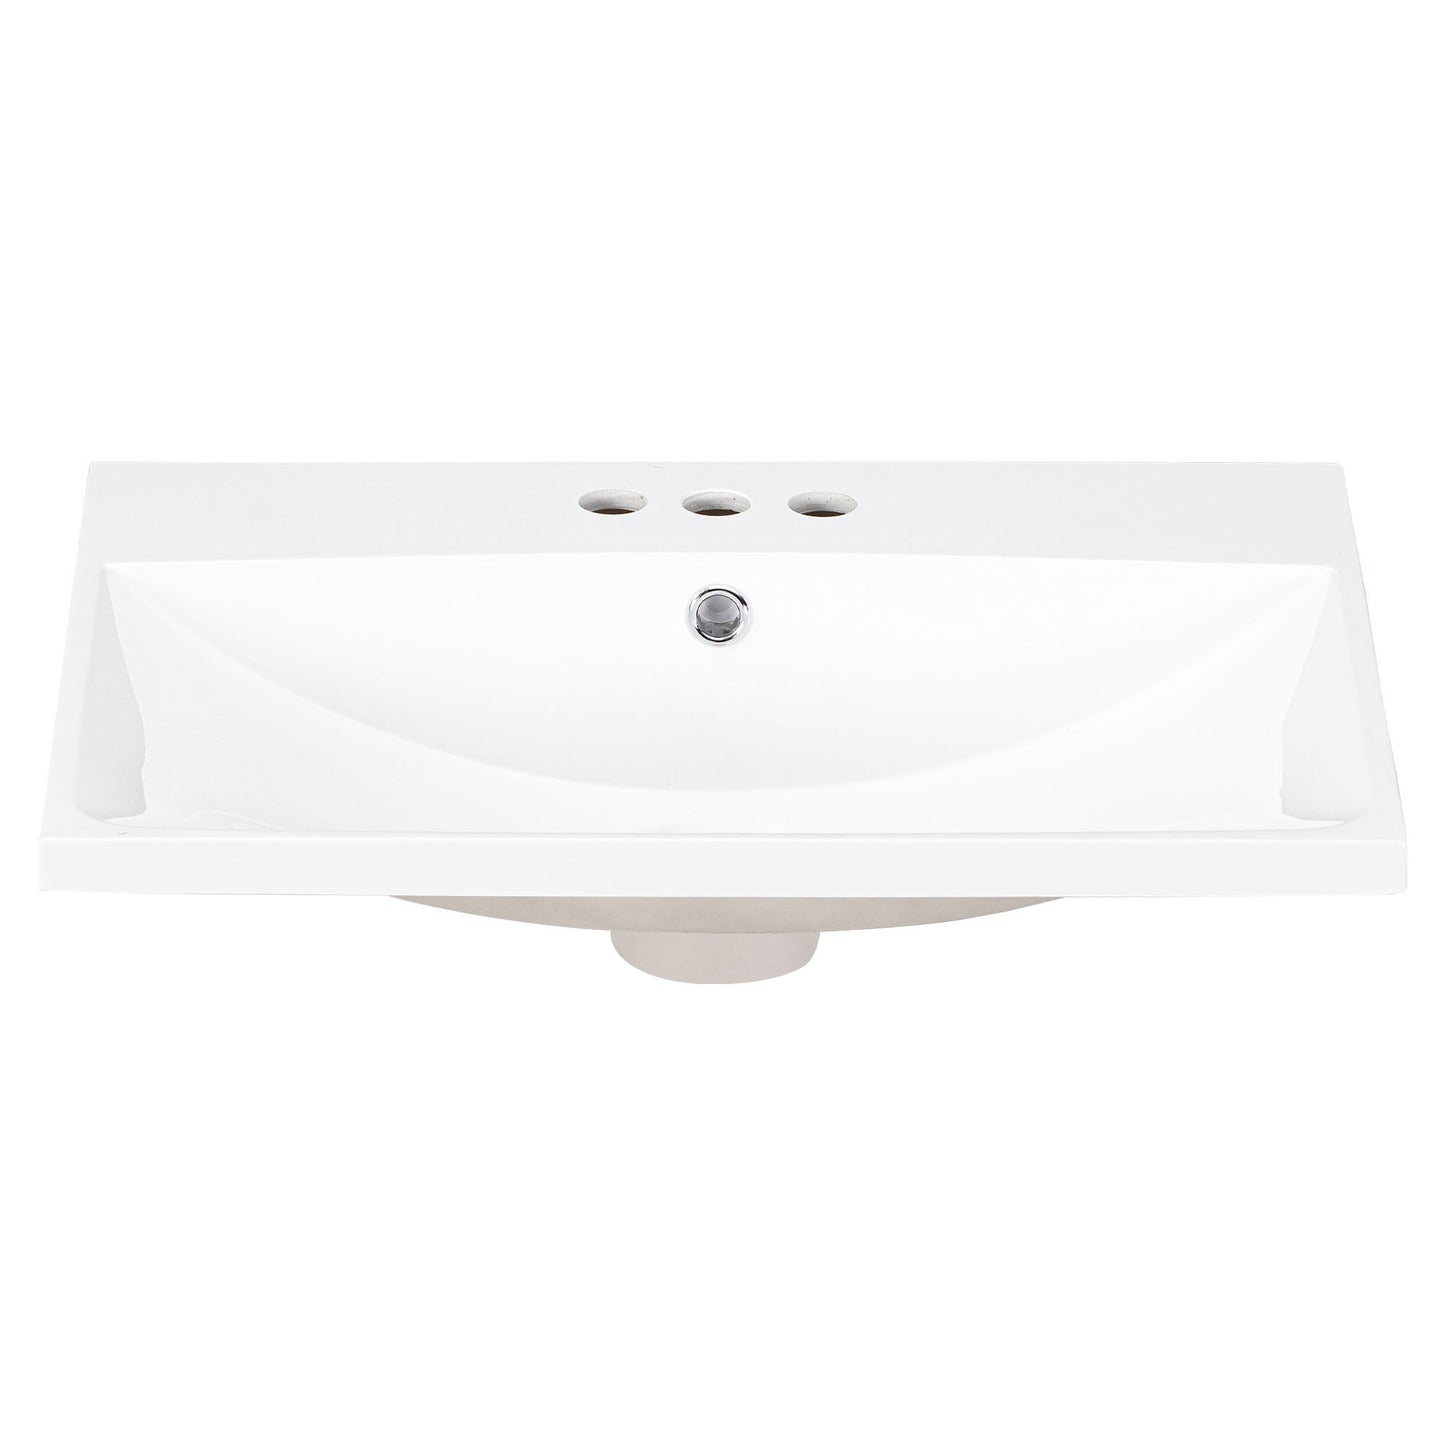 24" Bathroom Vanity Top Only, White Basin, 3-Faucet Holes, 4" Faucet Available, Ceramic